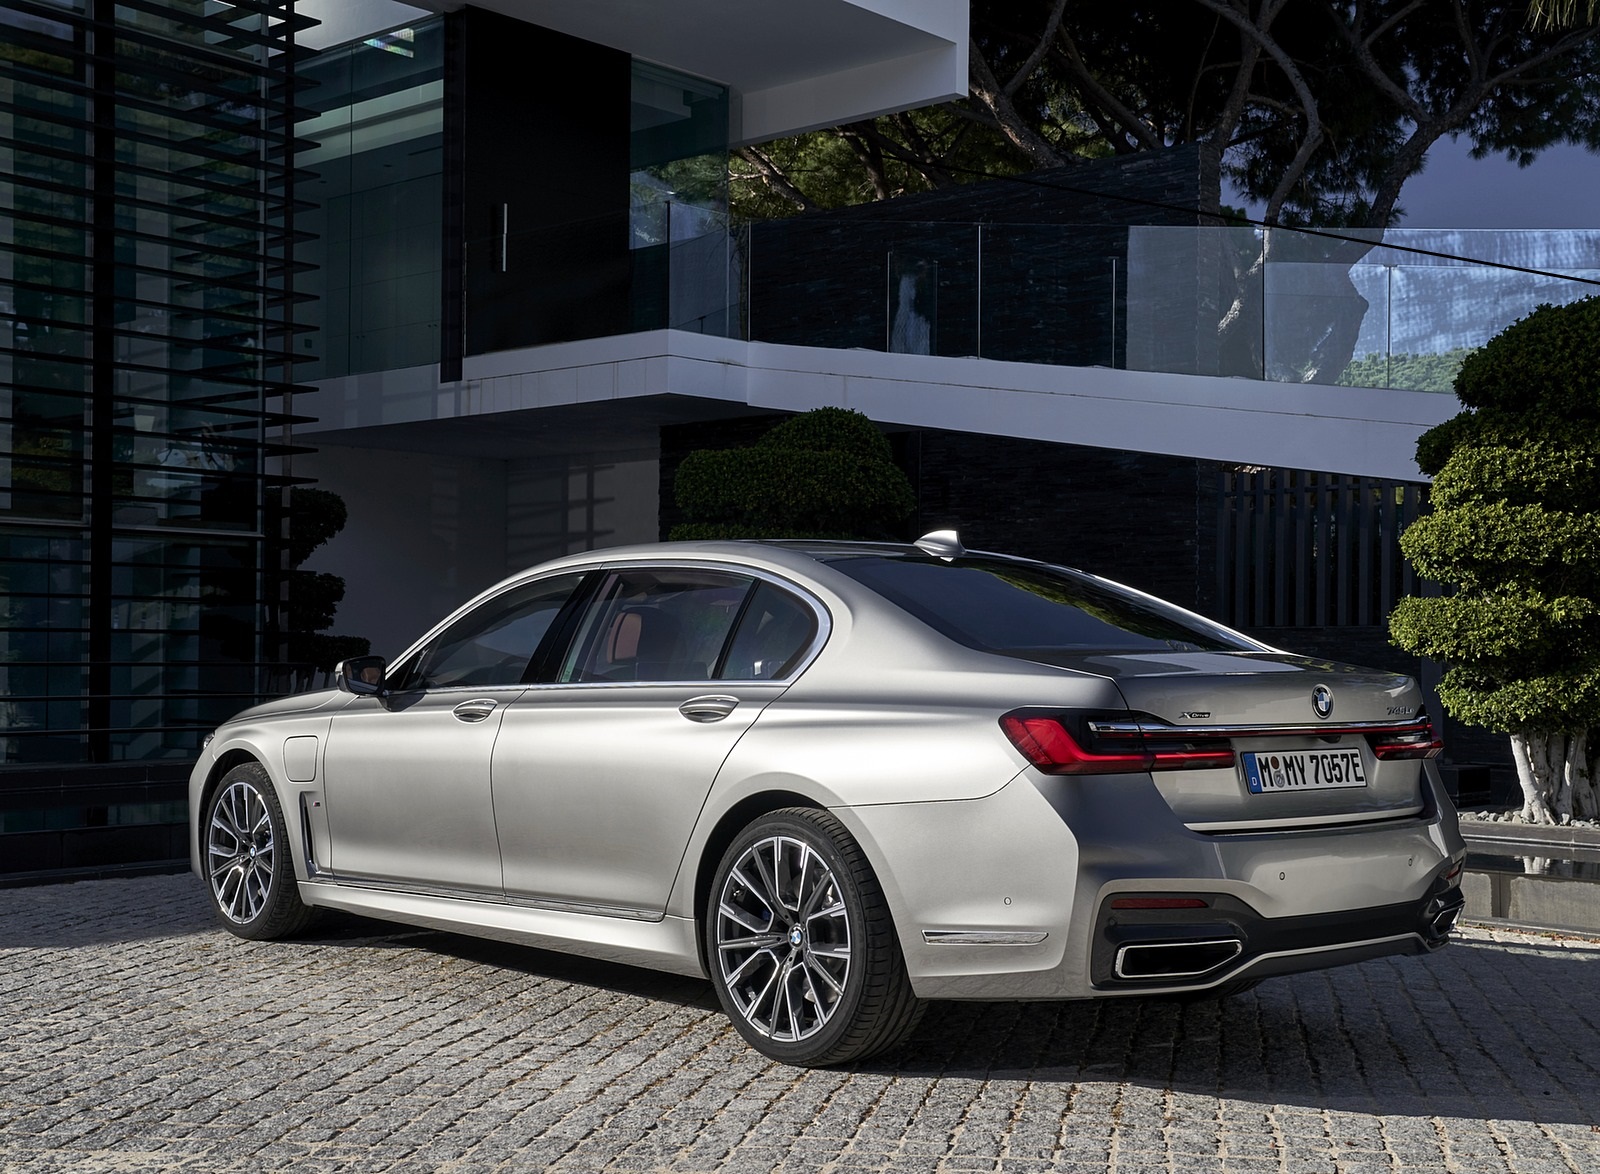 2020 BMW 7-Series 745Le xDrive Plug-In Hybrid Rear Three-Quarter Wallpapers  #28 of 131